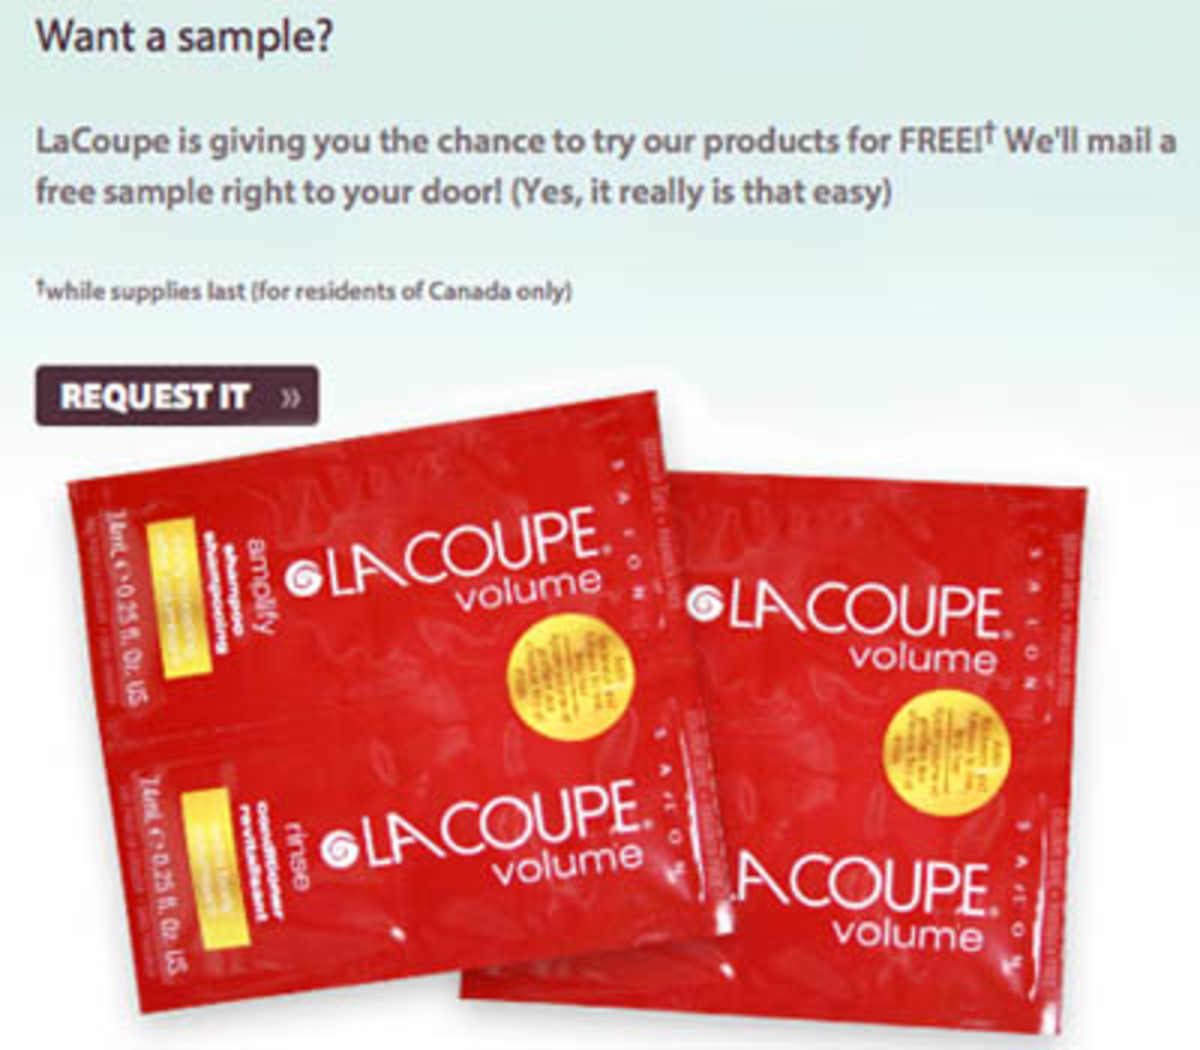 LaCoupe samples